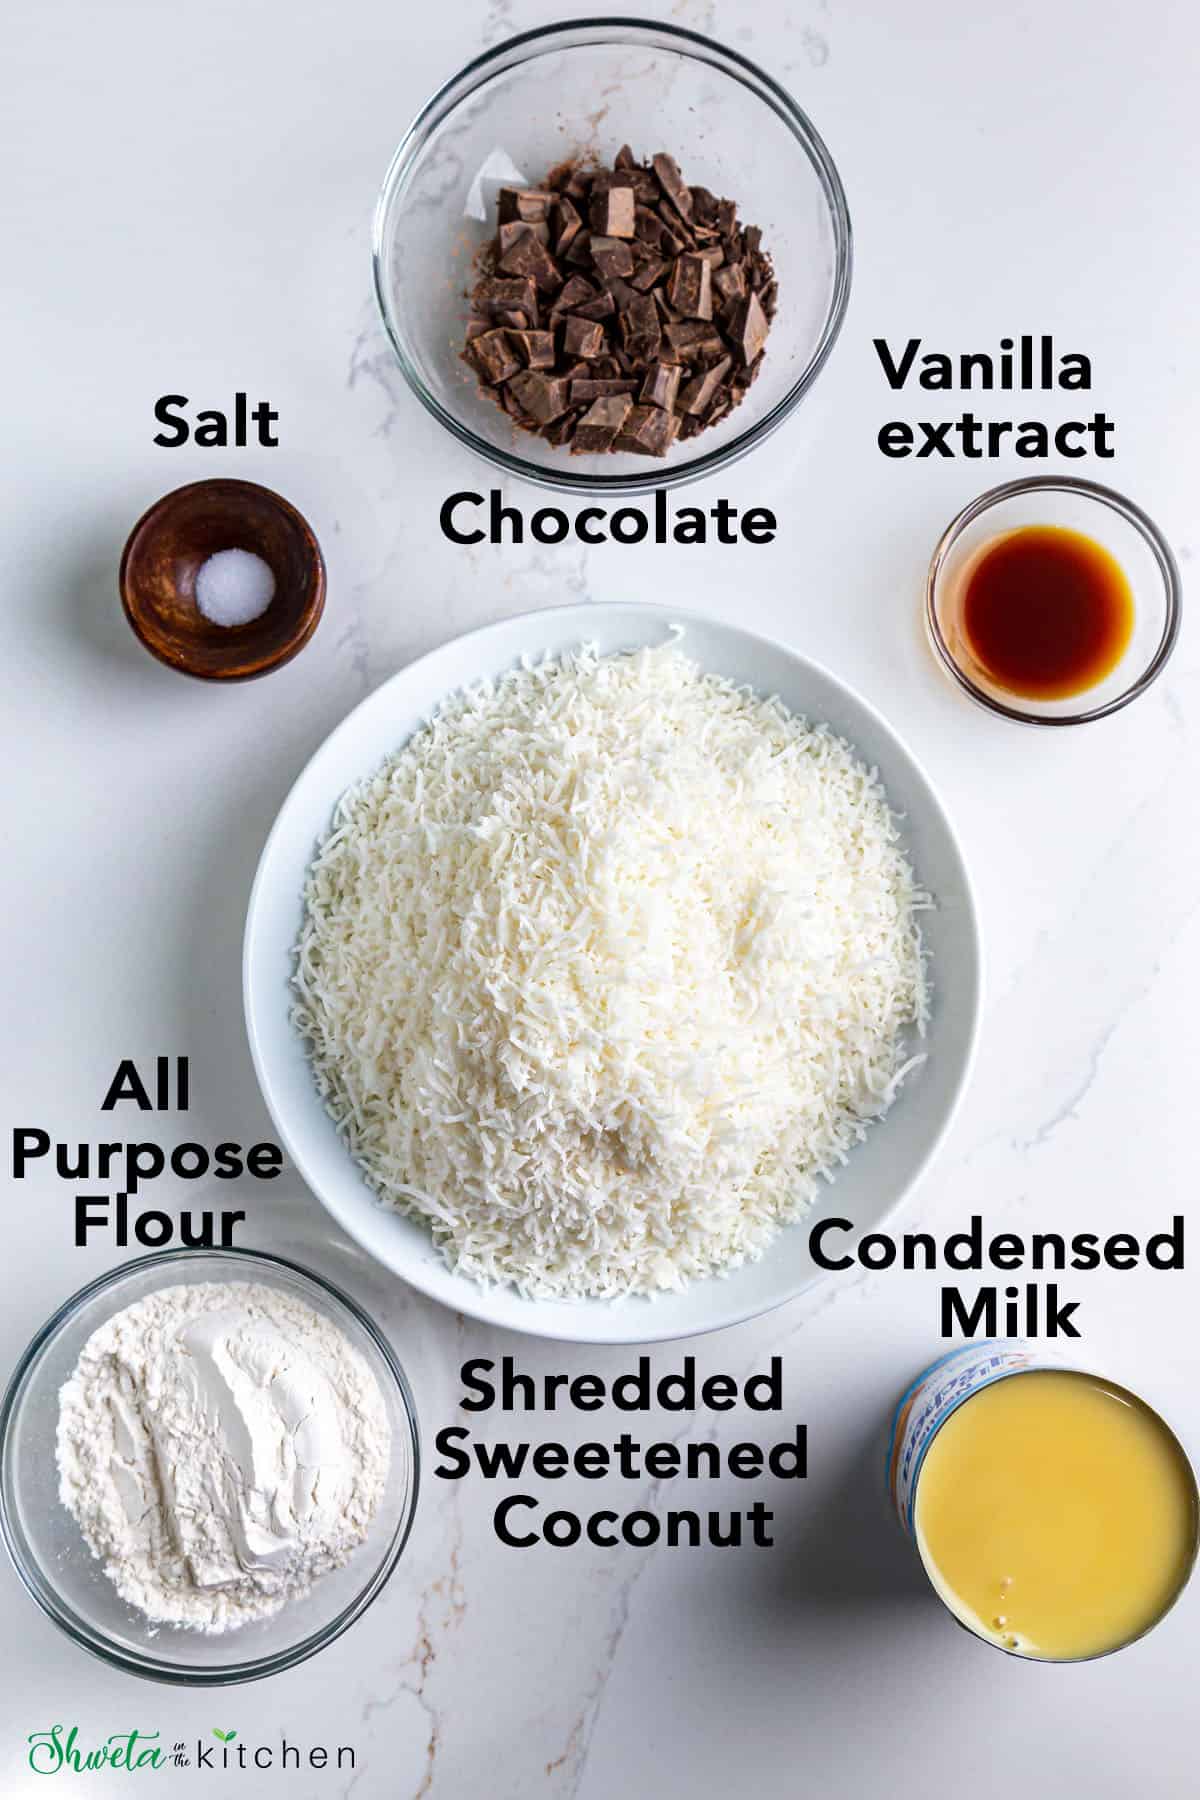 Ingredients for eggless coconut macaroons in bowls on white surface